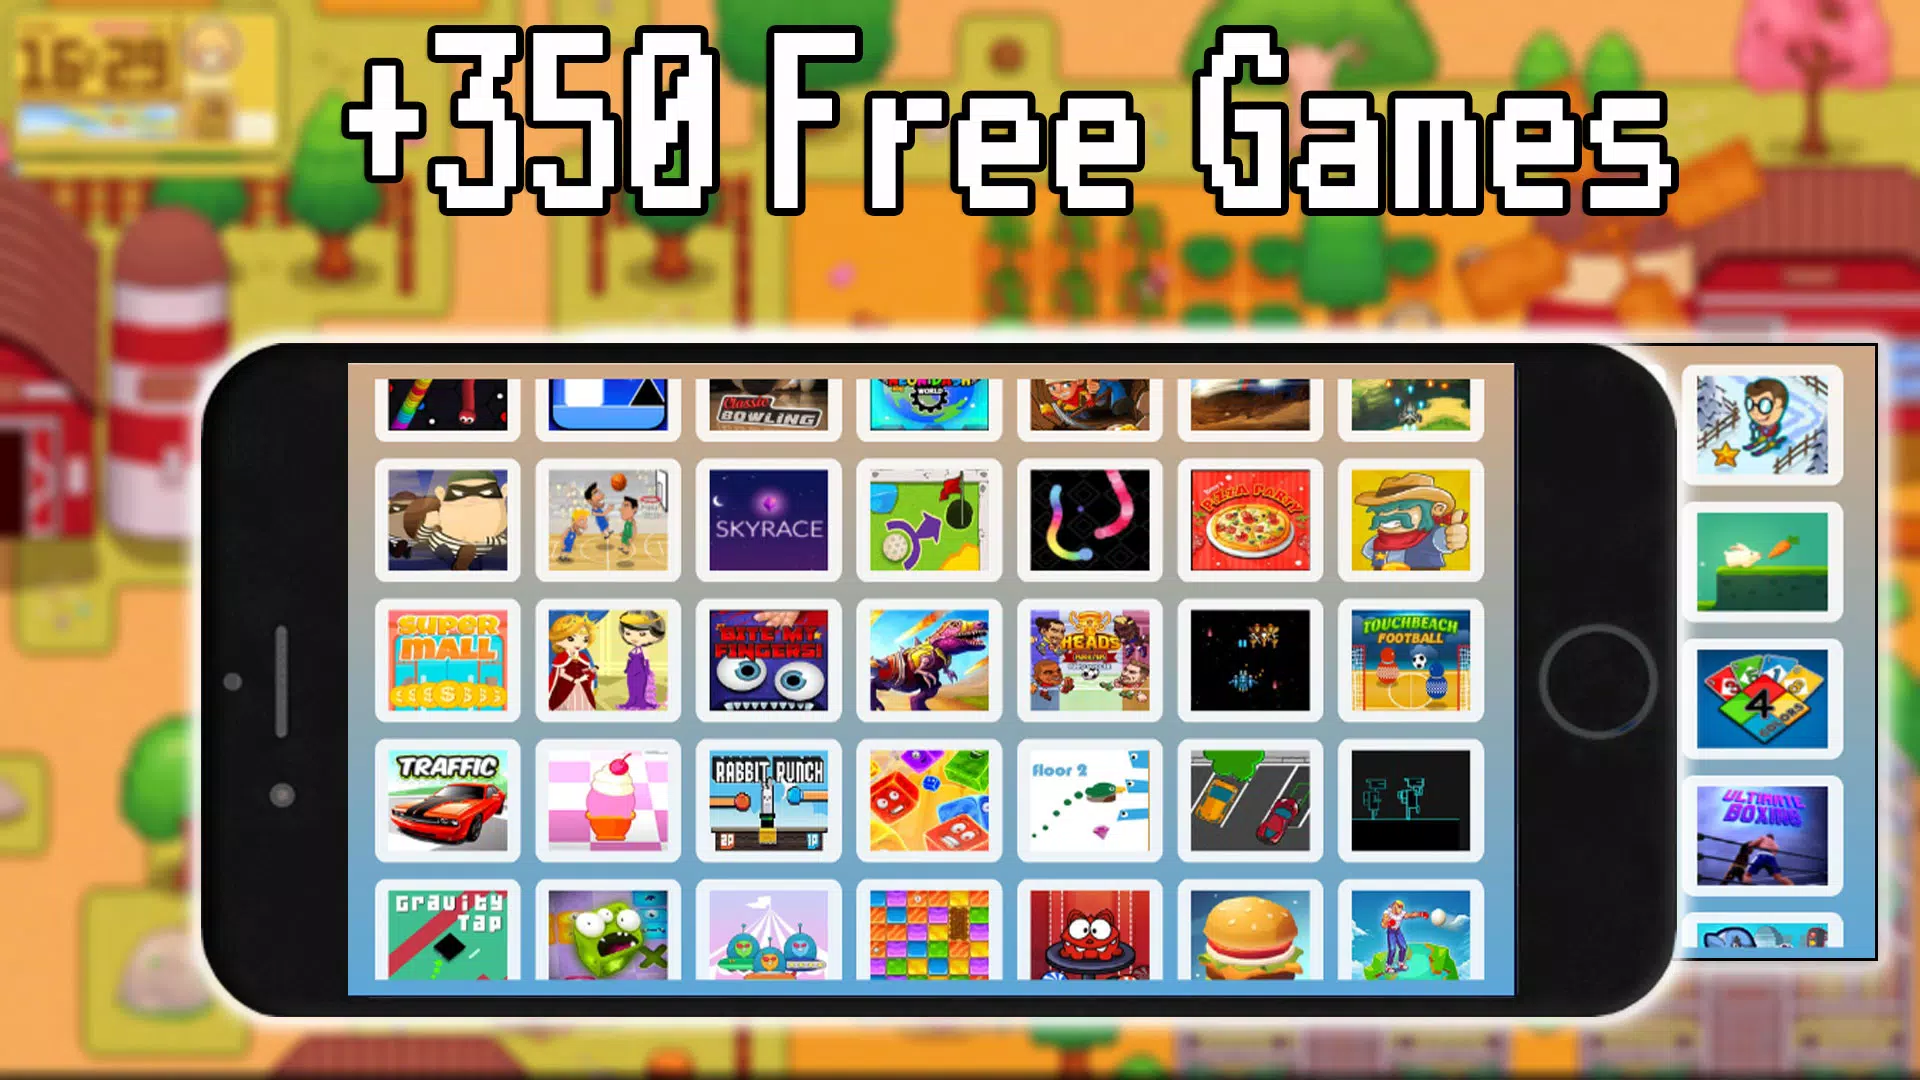 Stream The Best Multiplayer Mini Games for Android: Download 2 3 4 Player  Games APK from MispecXploxso